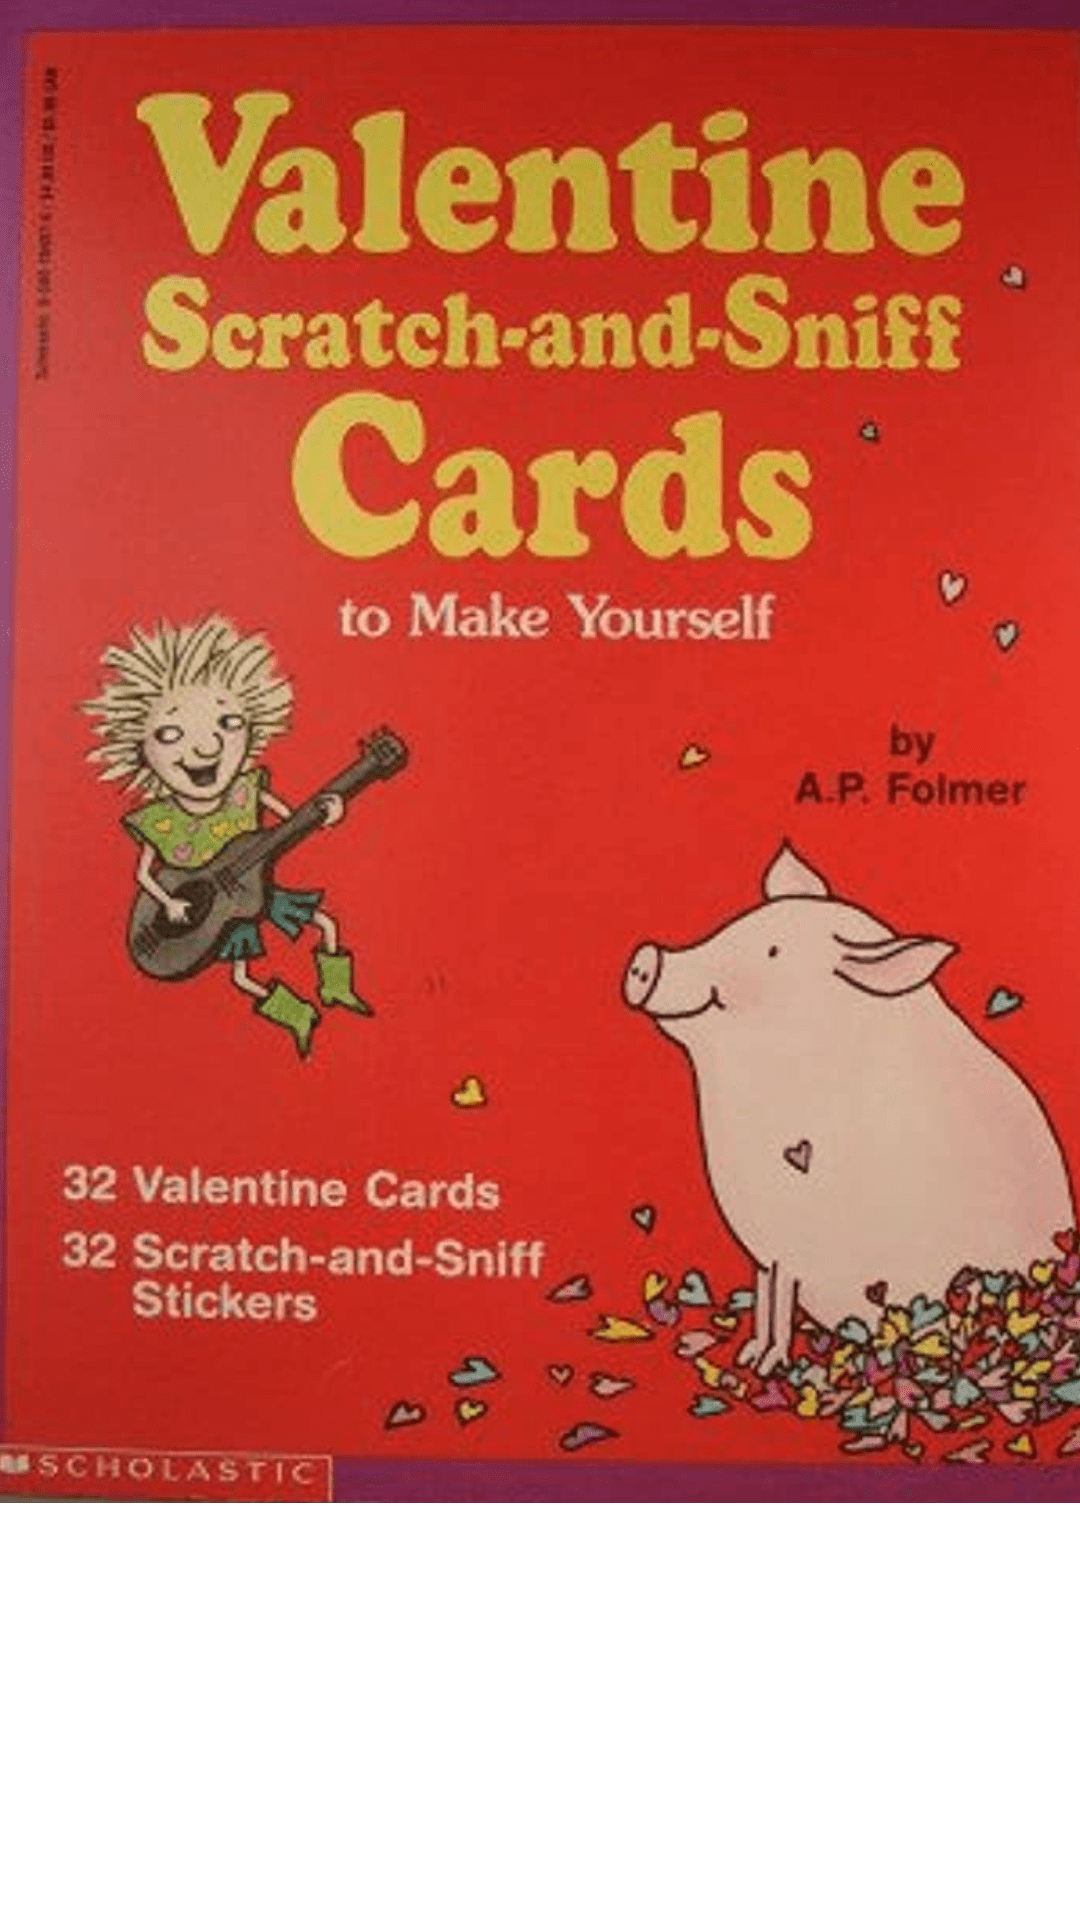 Valentine Scratch-and-Sniff Cards To Make Yourself